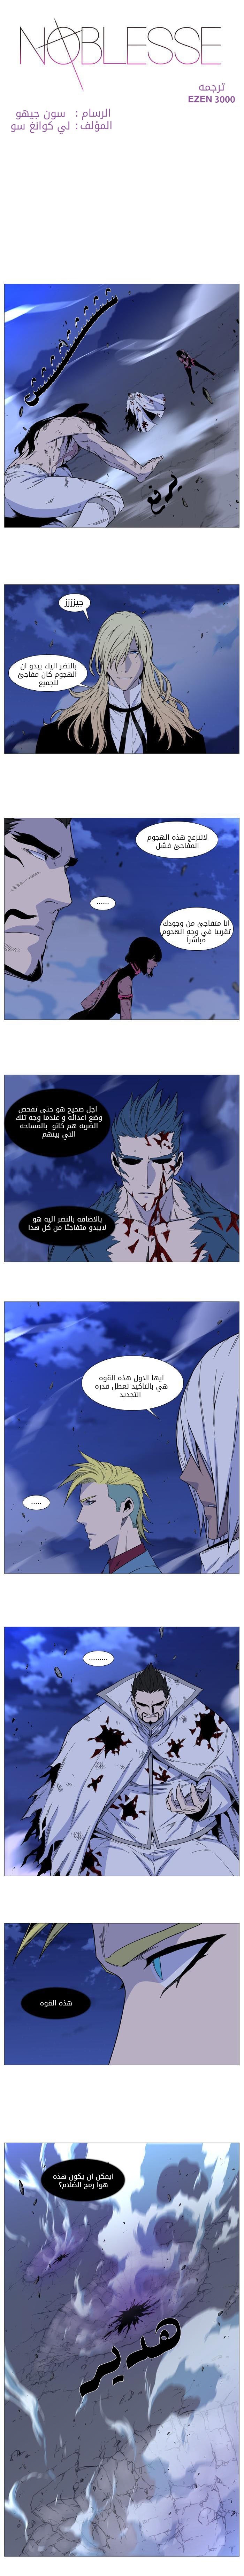 Noblesse: Chapter 497 - Page 1